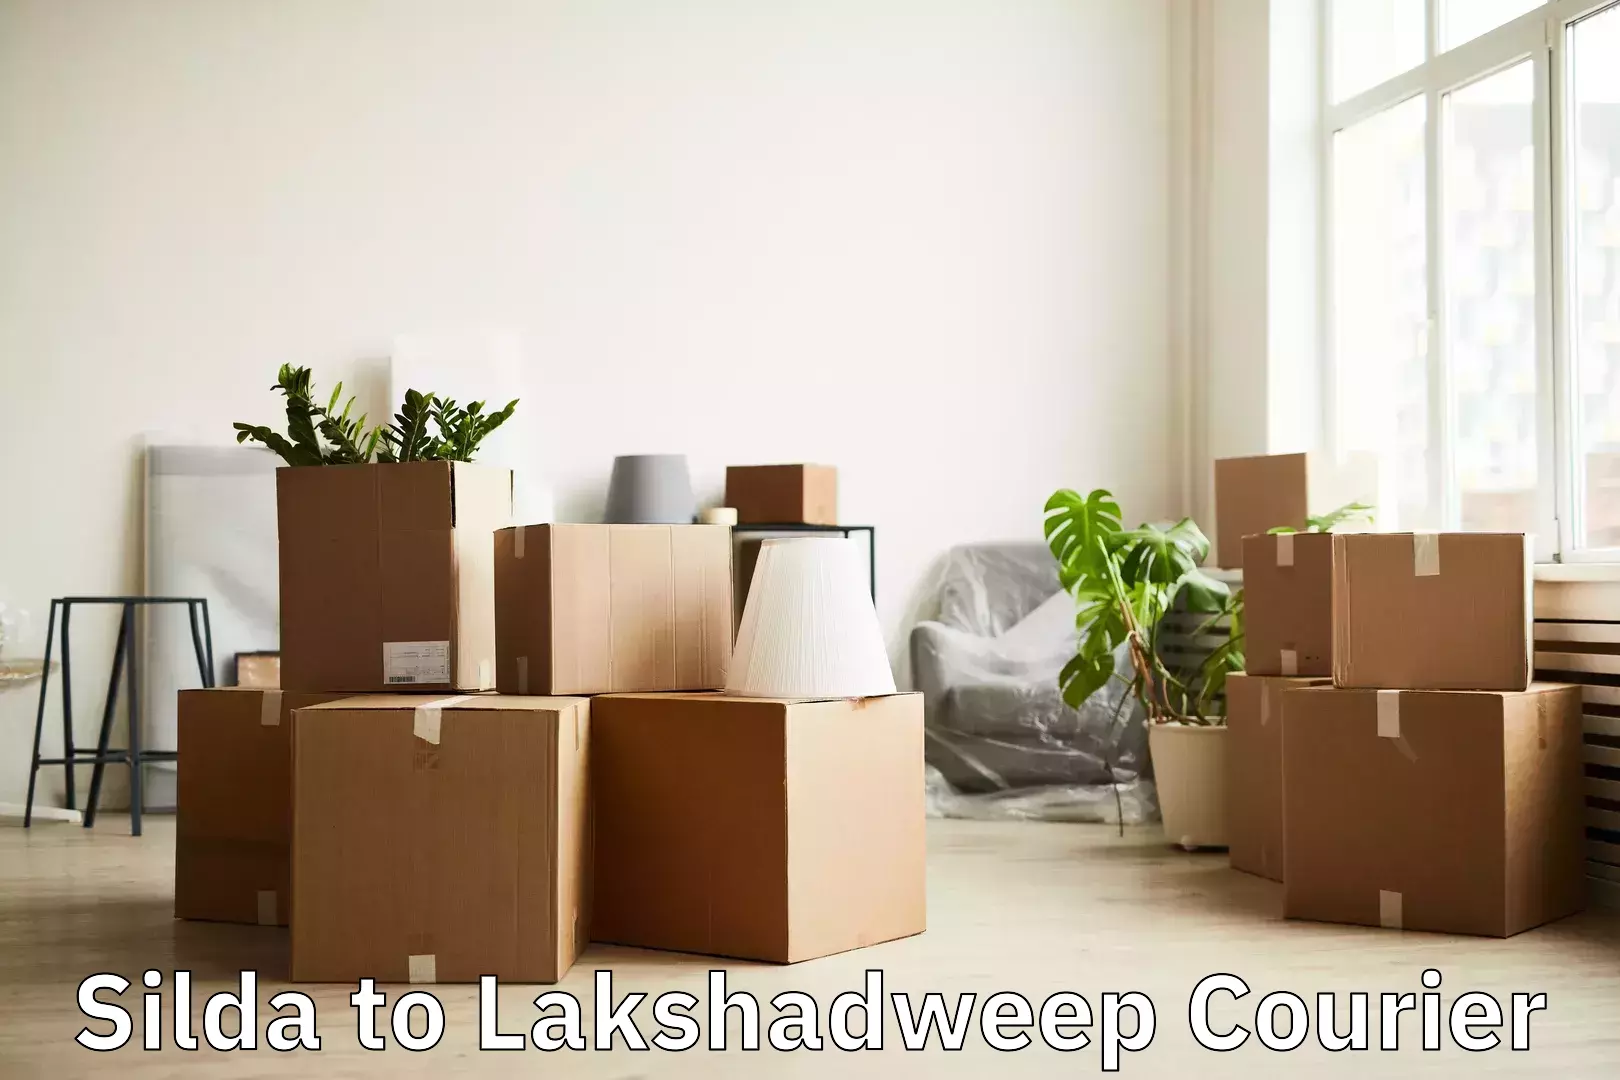 Luggage transport consulting Silda to Lakshadweep